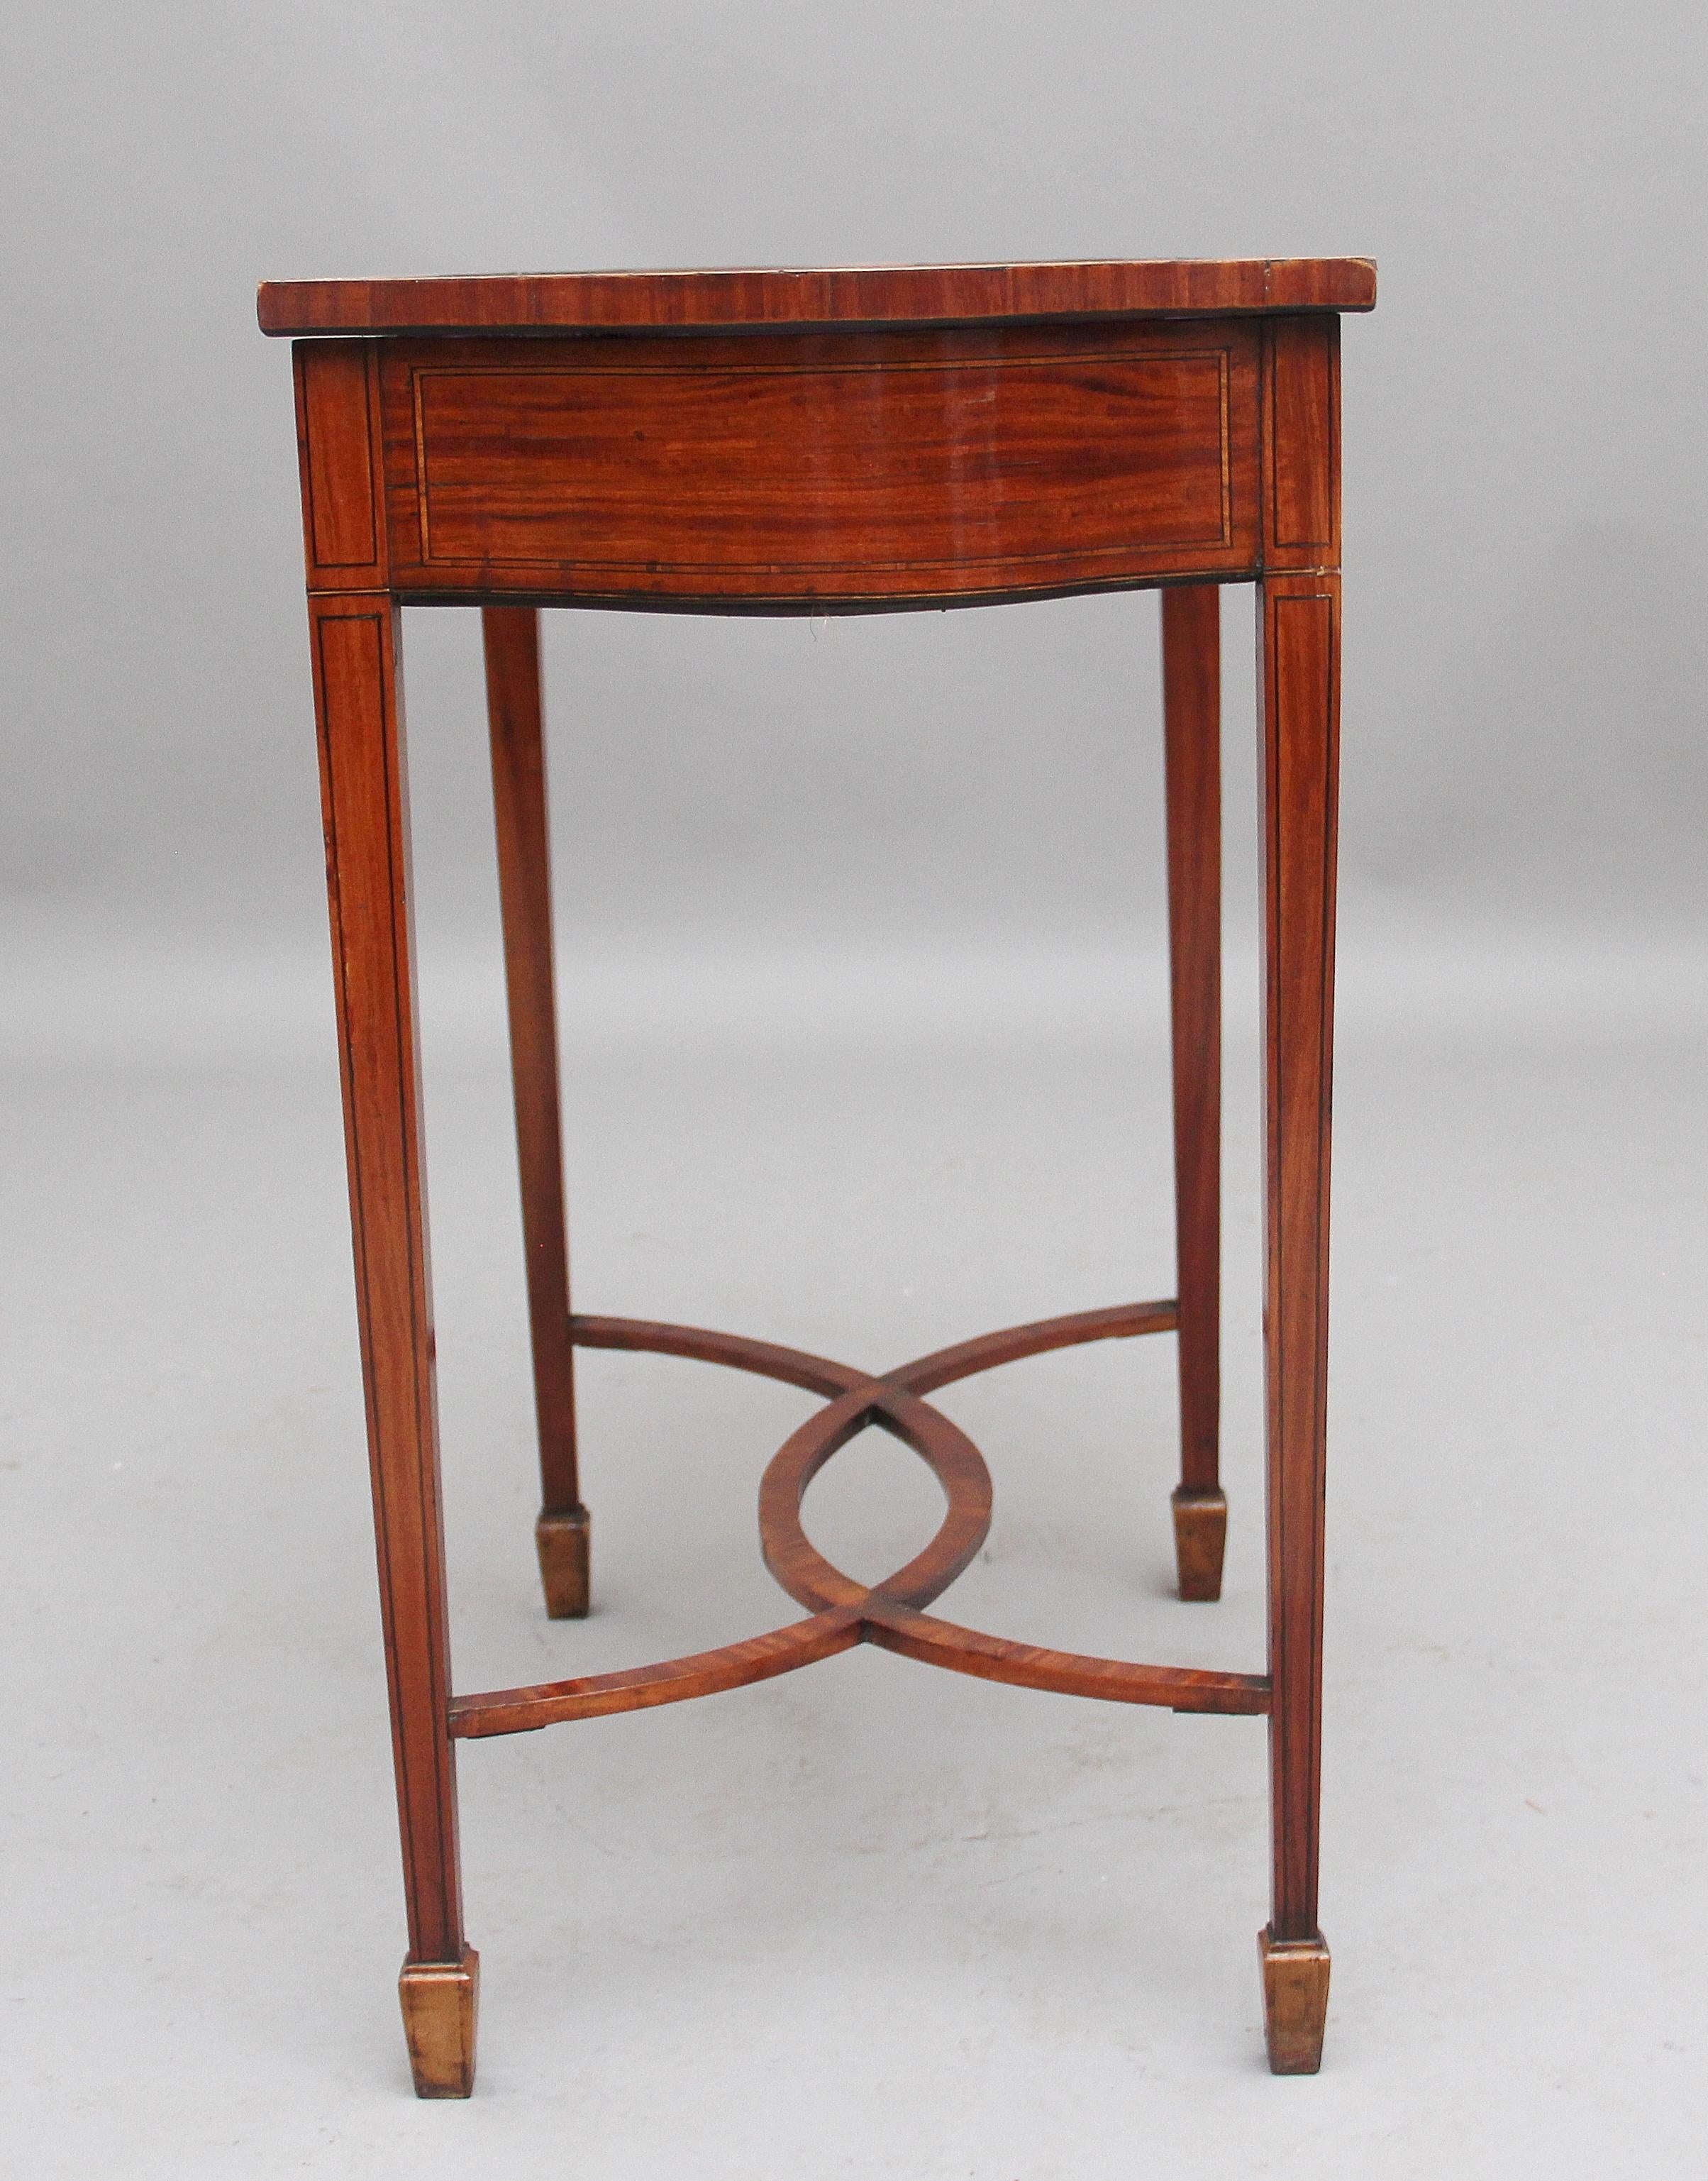 Edwardian Inlaid Satinwood Bijouterie Table For Sale 4